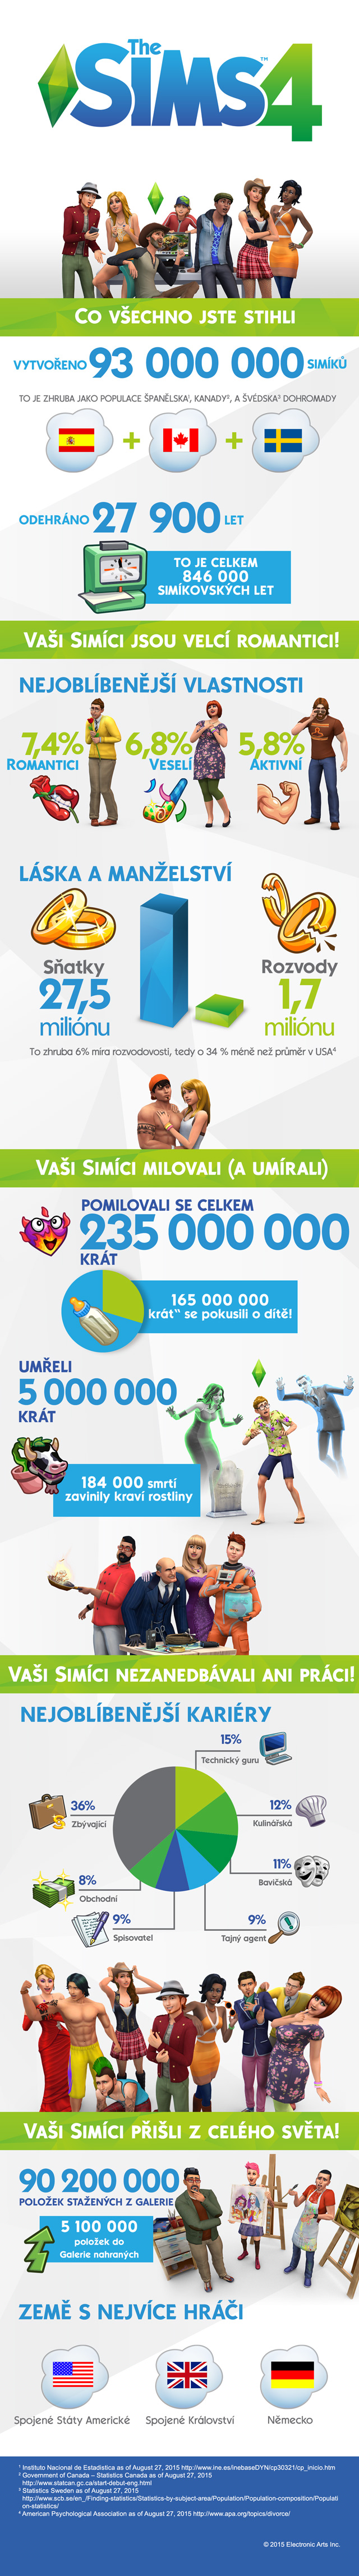 sims4stats